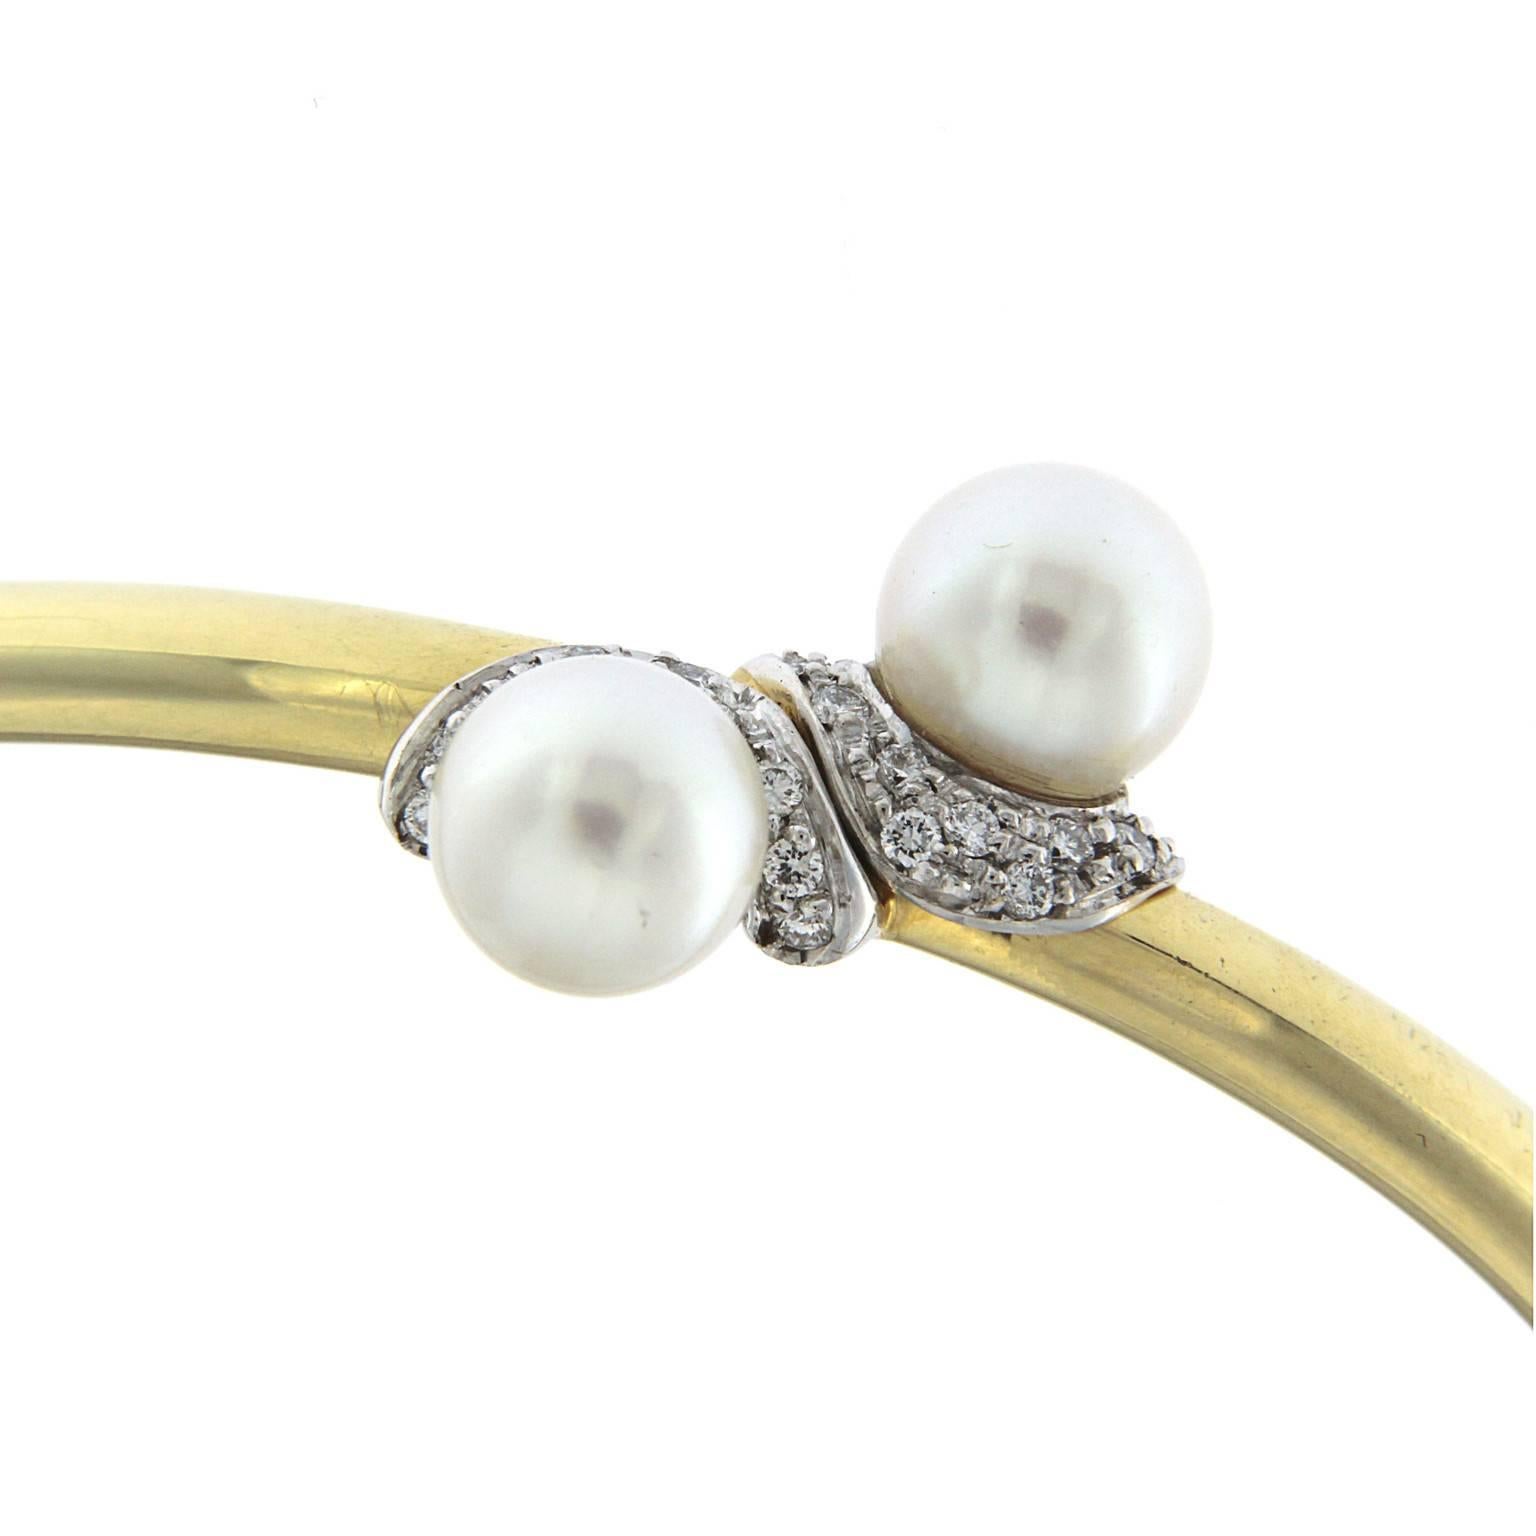 Contrast bracelet made with a double barrel coupled that makes it flexible to wear. White gold finals are stuck together to close it safely. The bracelet has a very refined design thanks to the position of the pearls. When the bracelet is worn and